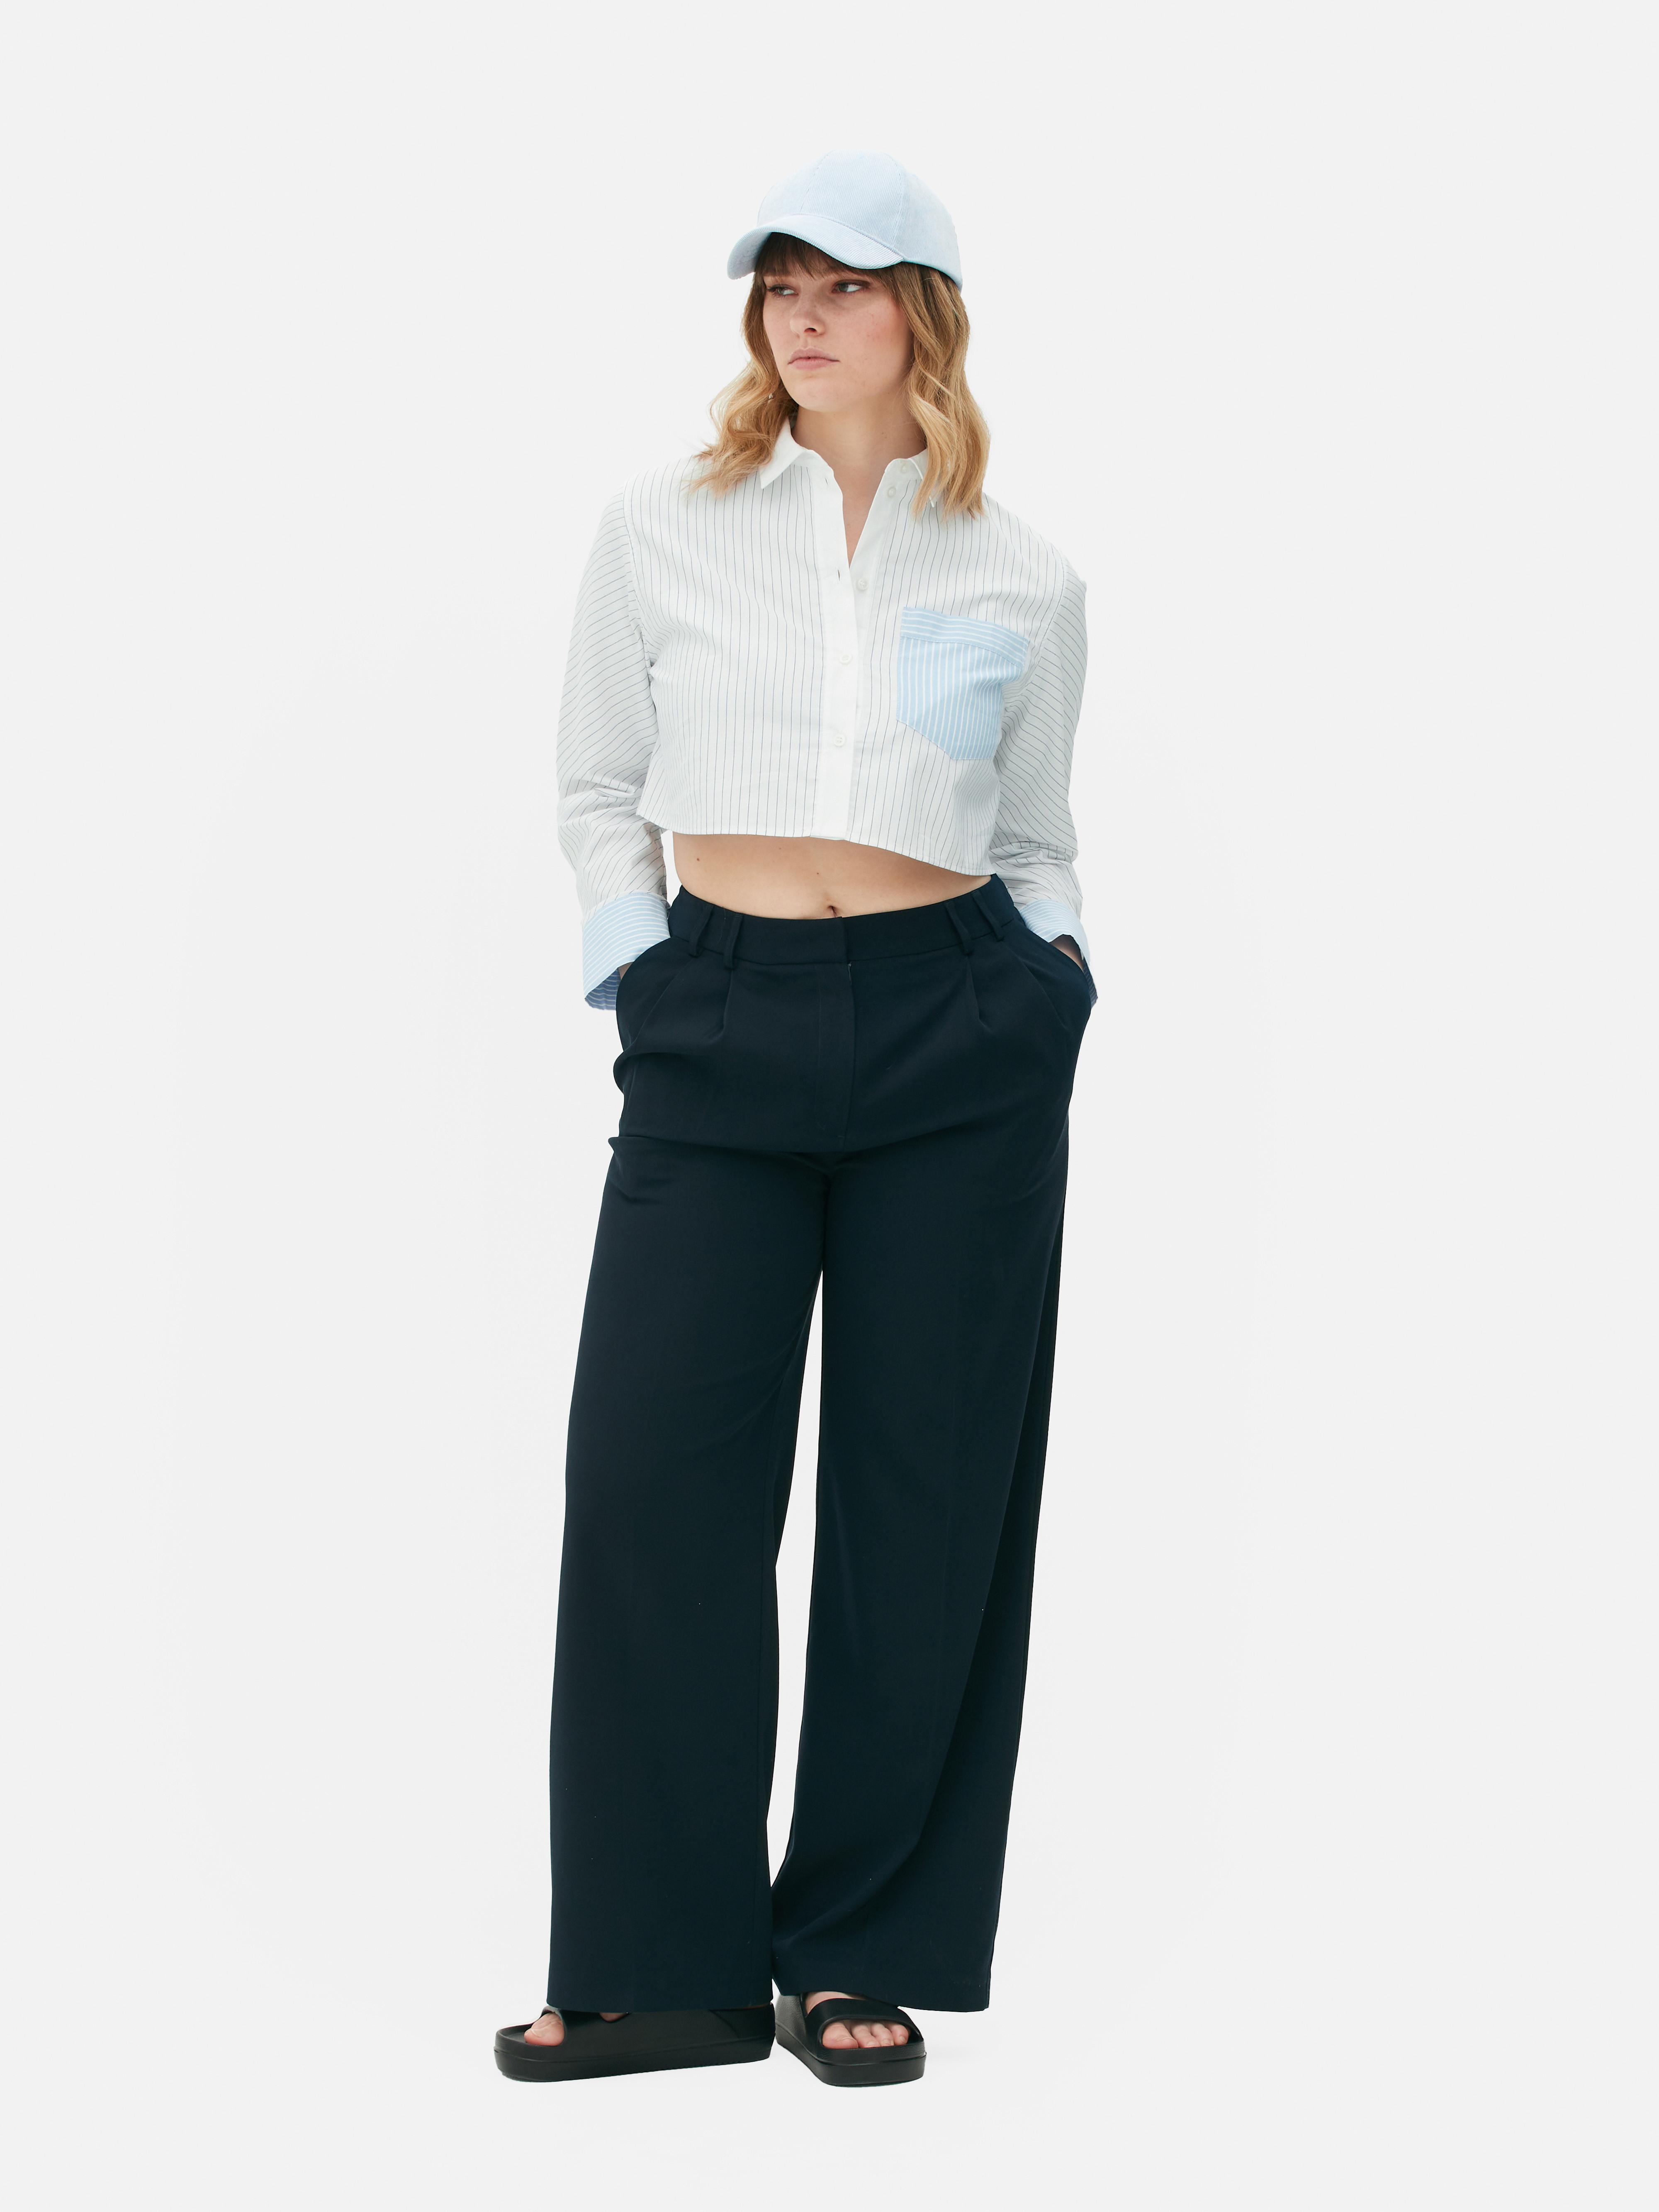 Primark Women's Tops & Blouses with Sale - August,2019 